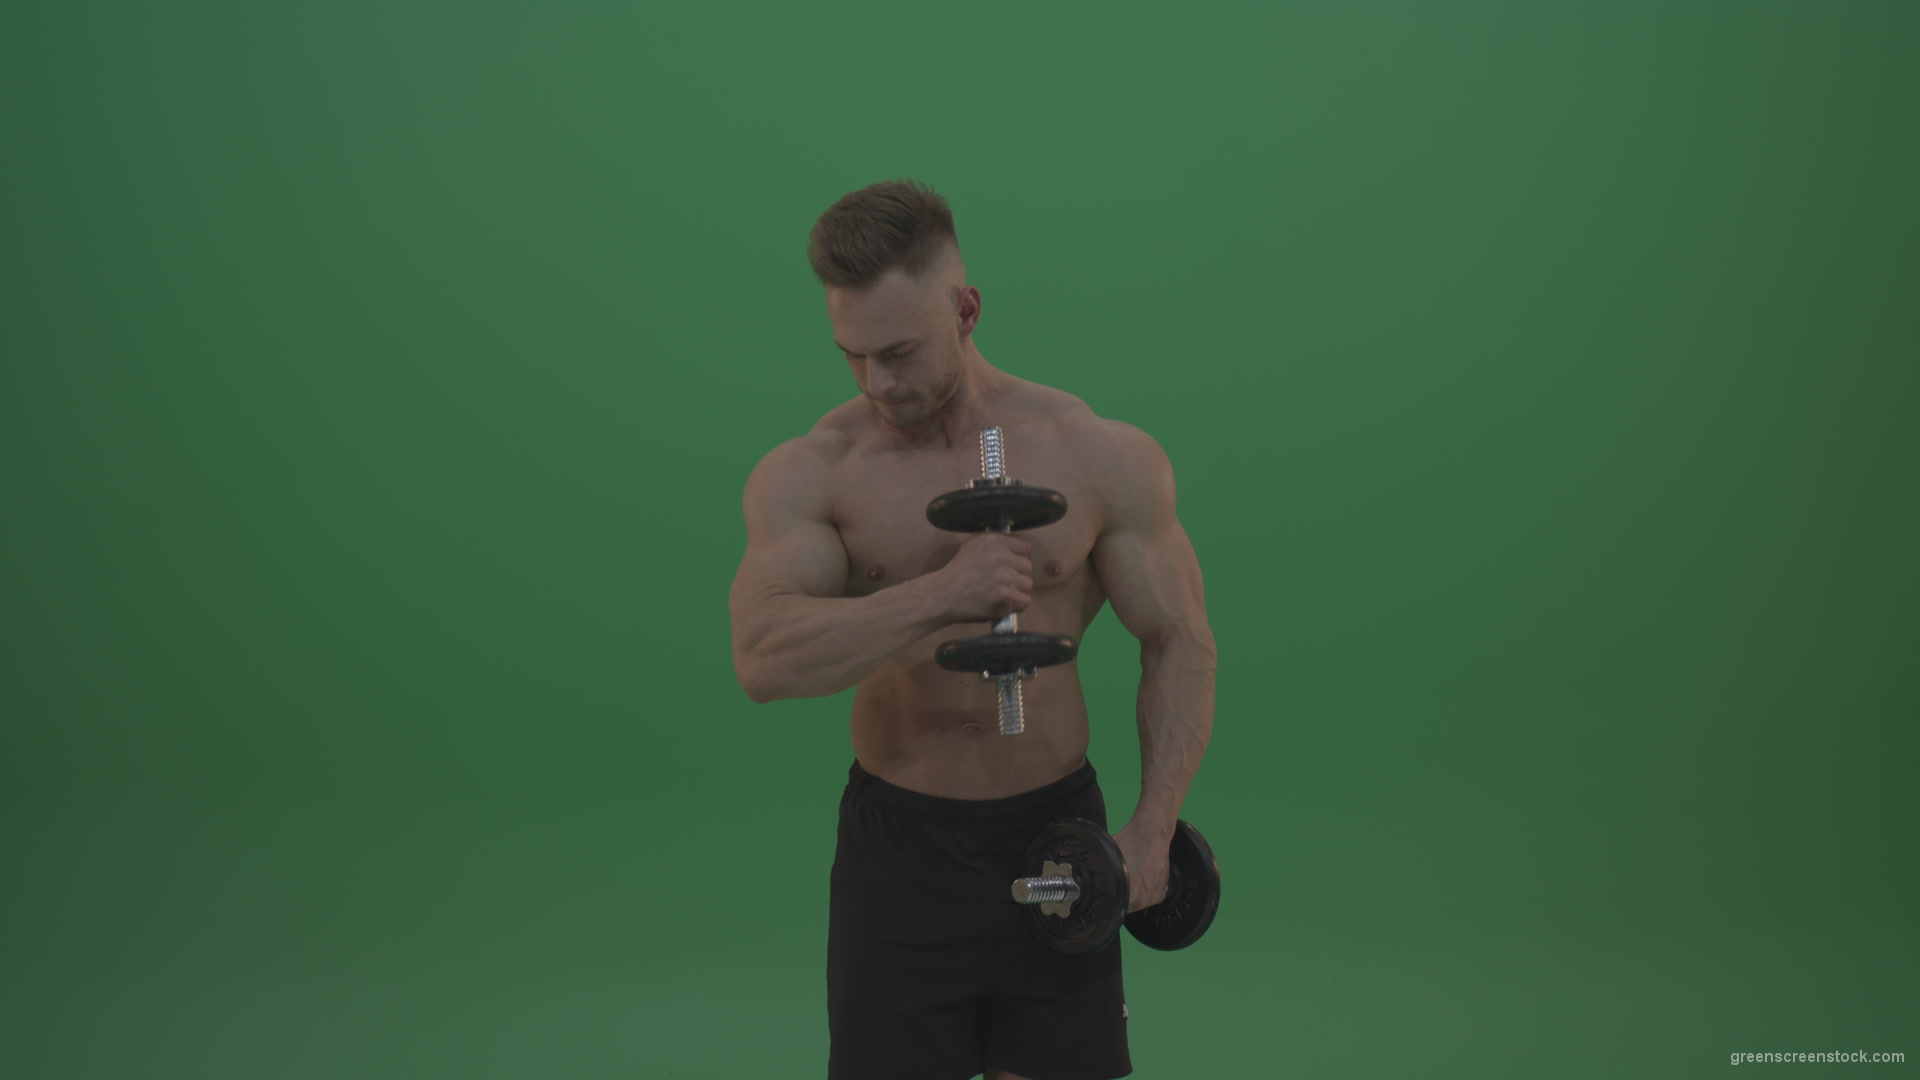 Young_Bodybuilder_Working_Out_With_Two_Handed_Dumbbell_Biceps_Exercises_On_Green_Screen_Wall_Background_002 Green Screen Stock